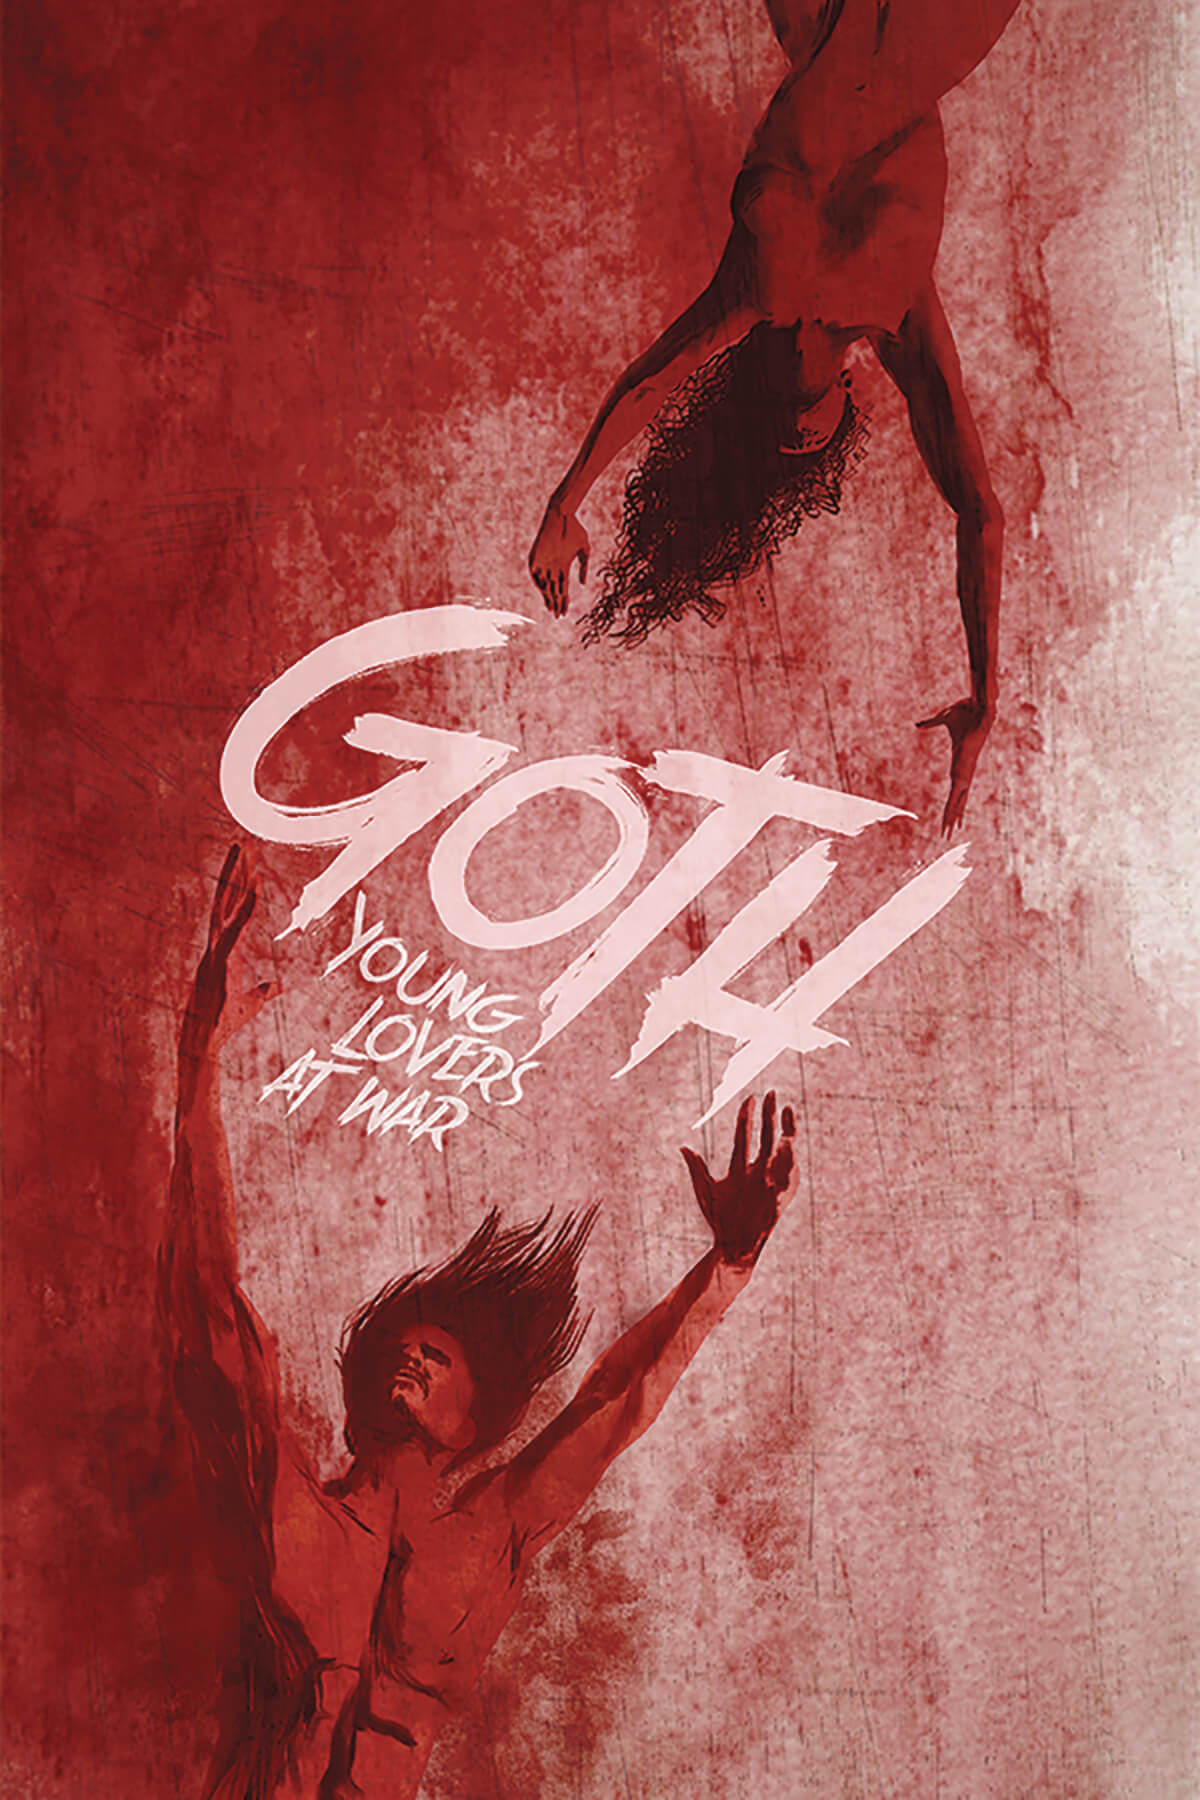 The cover of Goth: Young Lovers at War